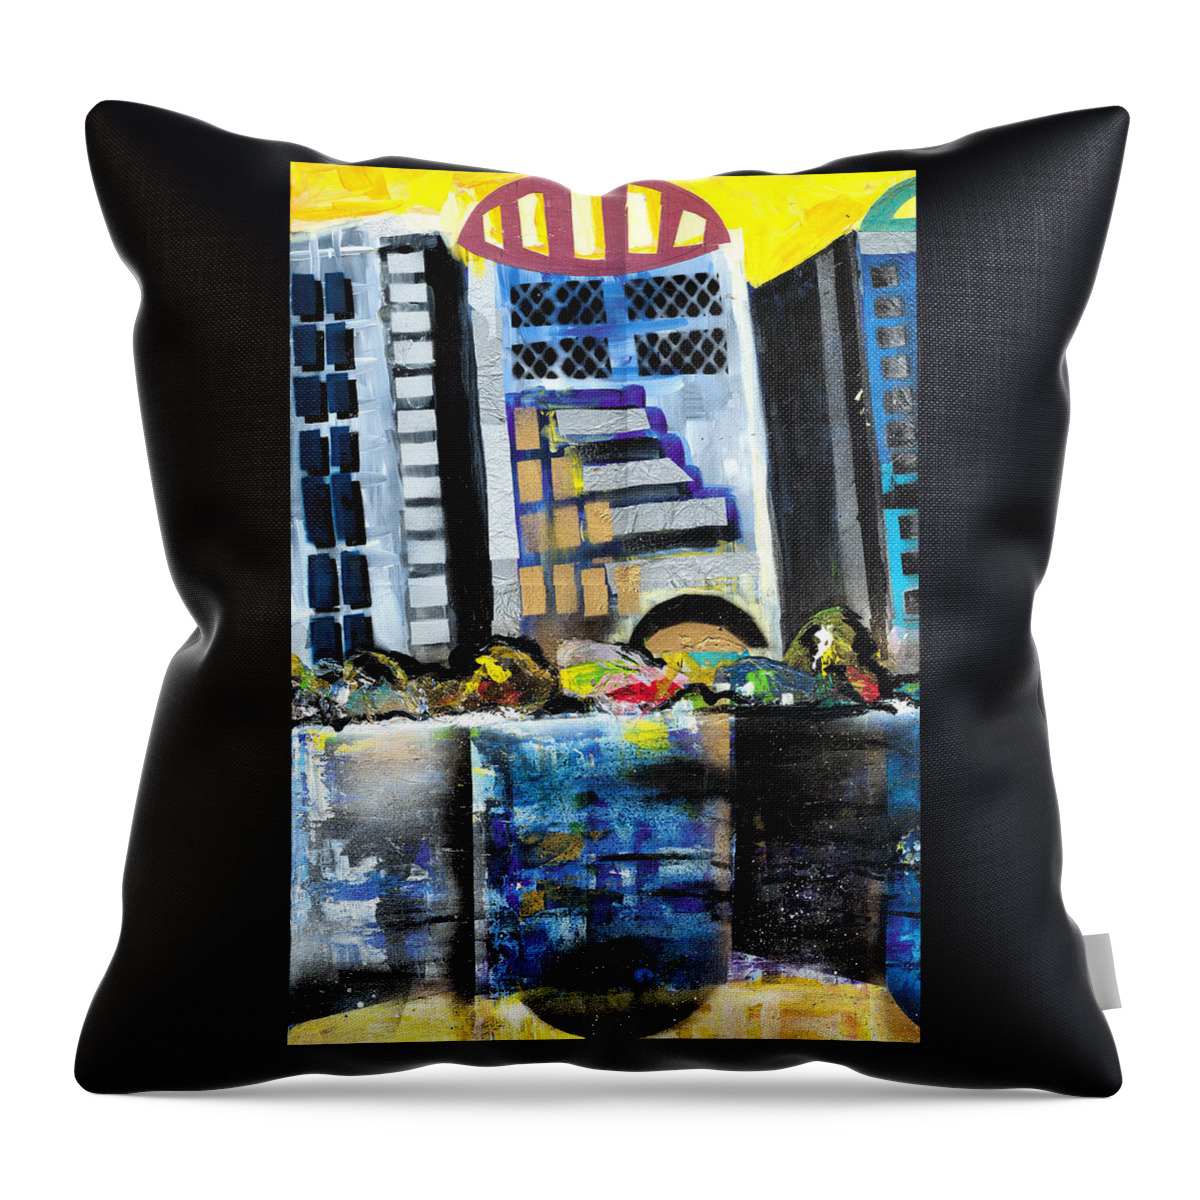 Orlando Throw Pillow featuring the painting Lake Eola - part 1 of 3 by Everett Spruill